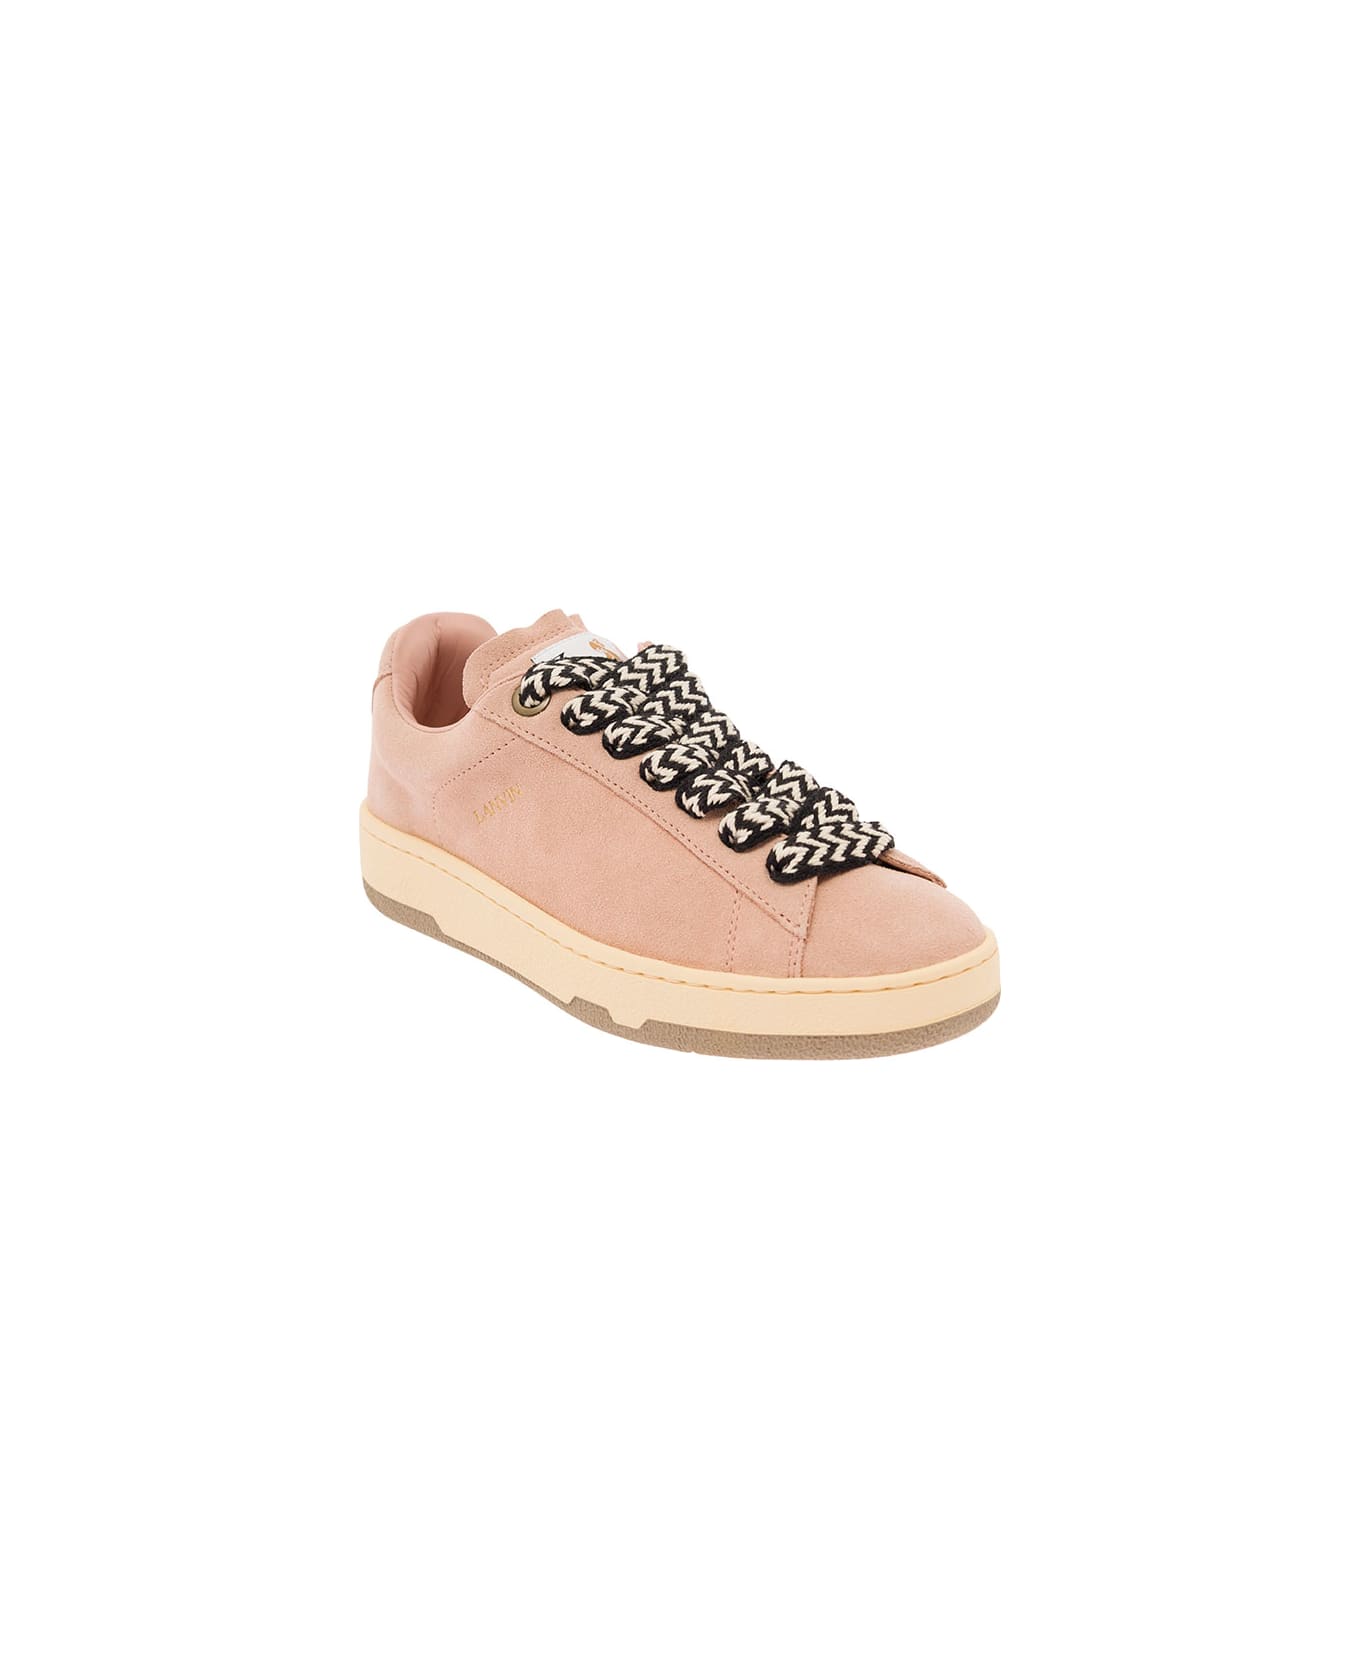 Lanvin 'lite Curb' Pink Low Top Sneakers With Oversized Multicolor Laces In Suede Woman - Pink